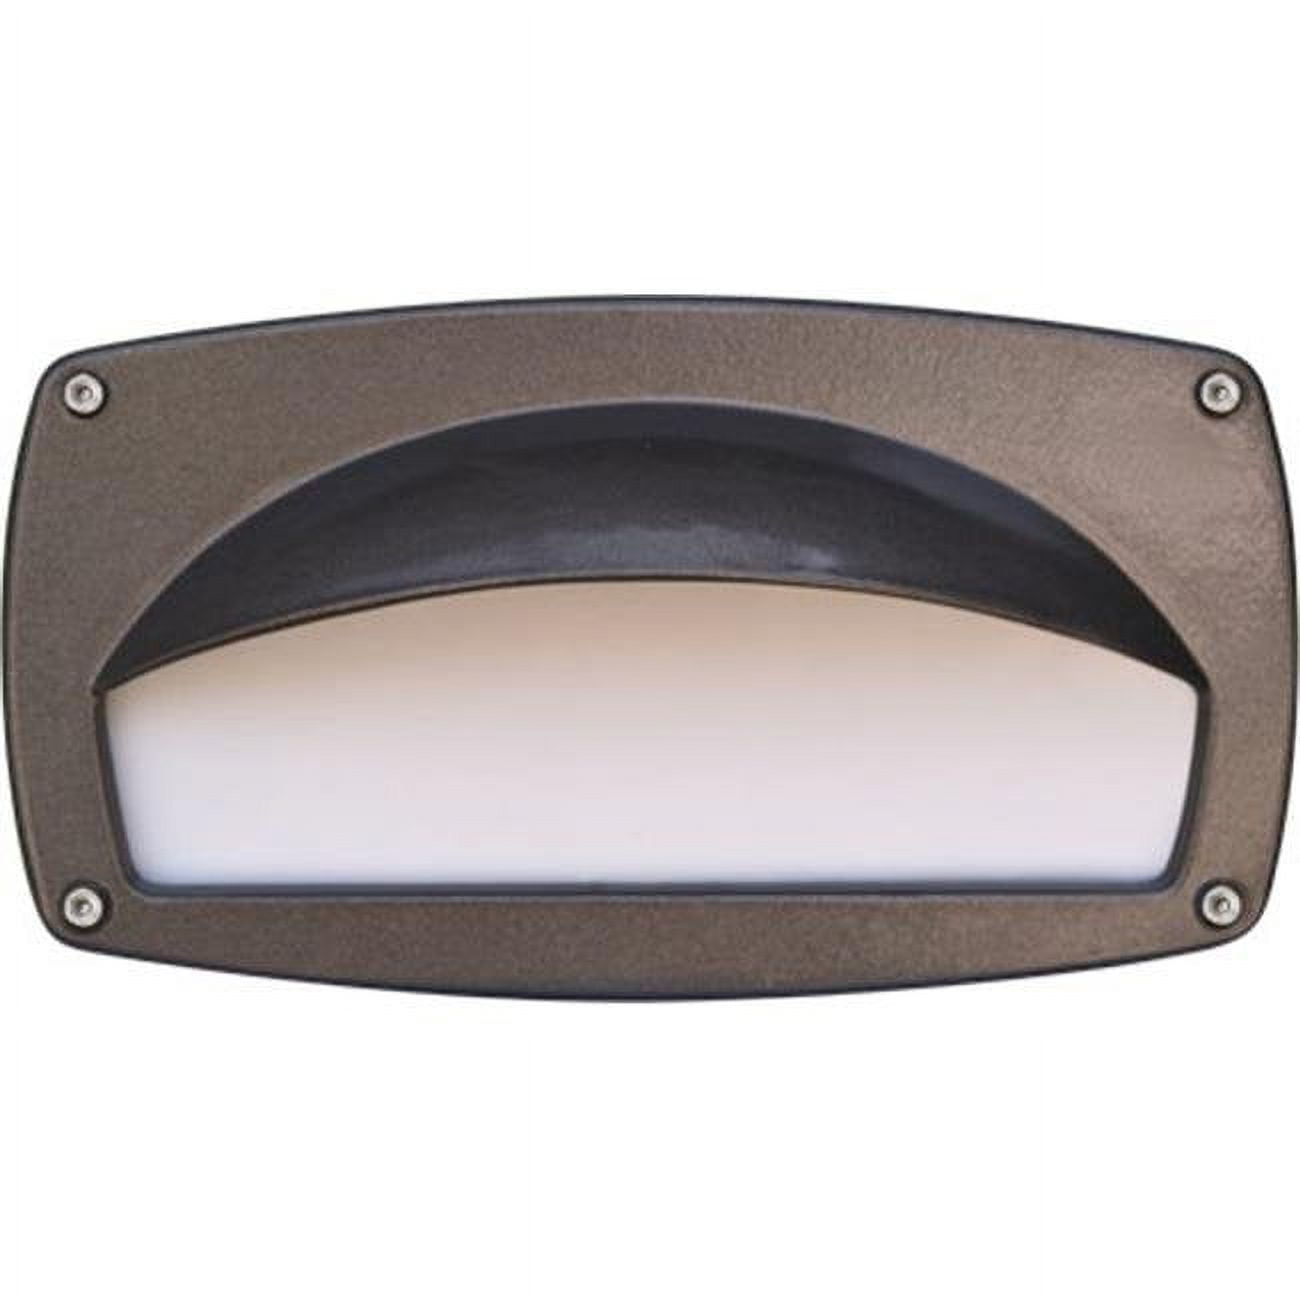 Picture of Dabmar Lighting DSL1014-BZ Recessed Hooded Brick, Step & Wall Light, Bronze - 4.95 x 9 x 3.80 in.